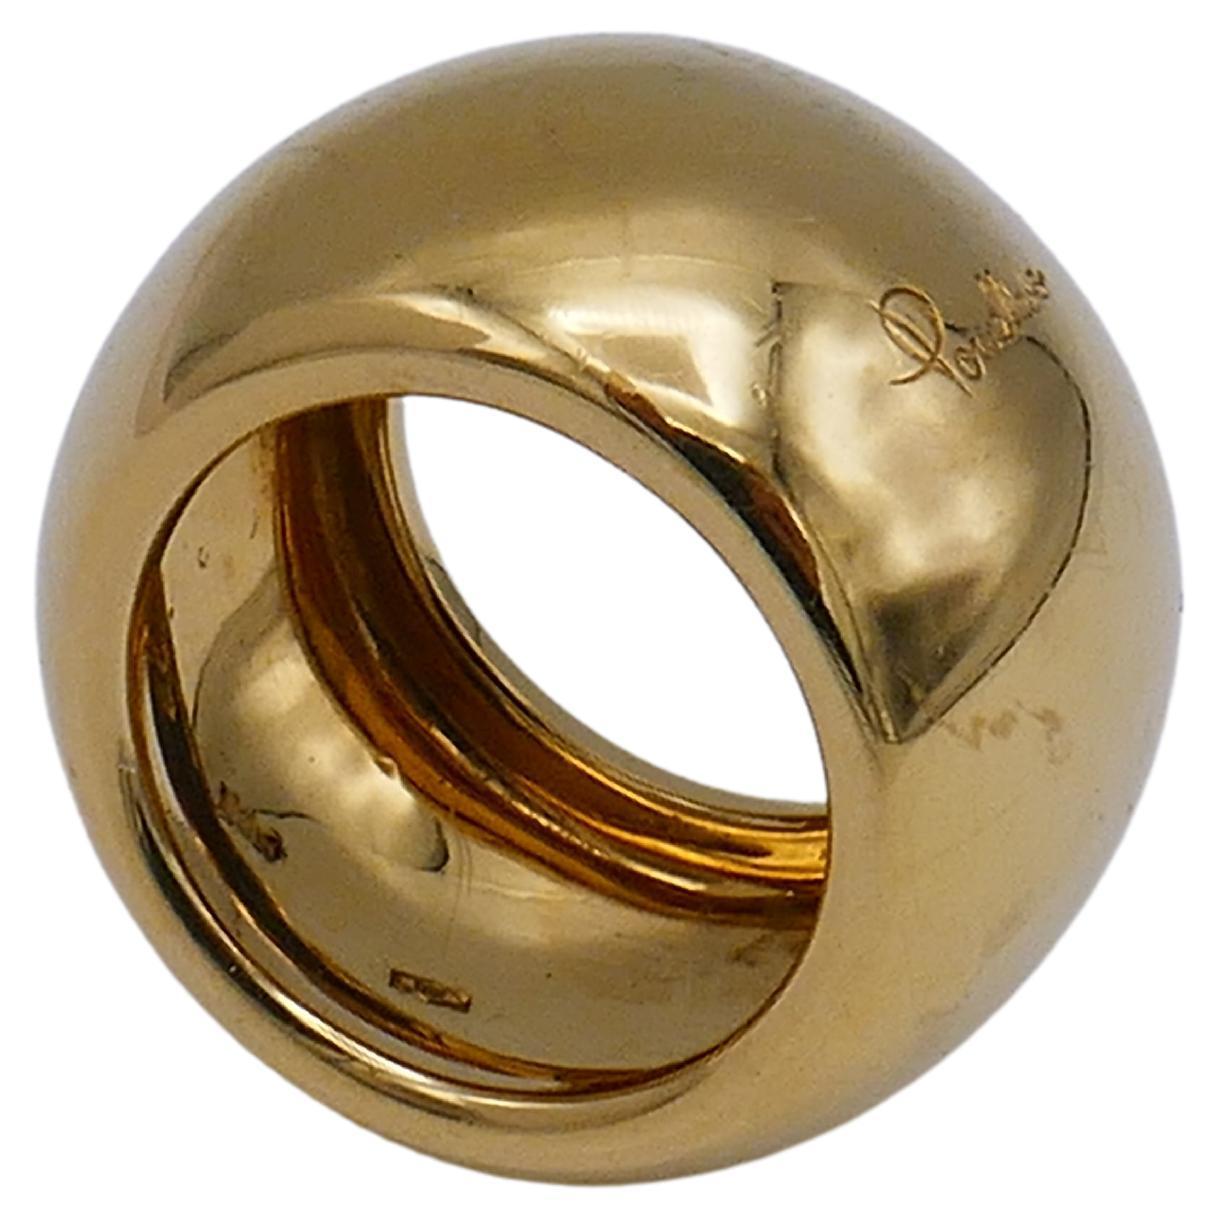 A glossy Pomellato cigar band ring, made of 18k gold. The ring size is 6.5.
The band is thick and have a nice weight but not too heavy.
It's an excellent ring to wear solo as well as a part of a ring party.
The pure, minimalistic design makes this